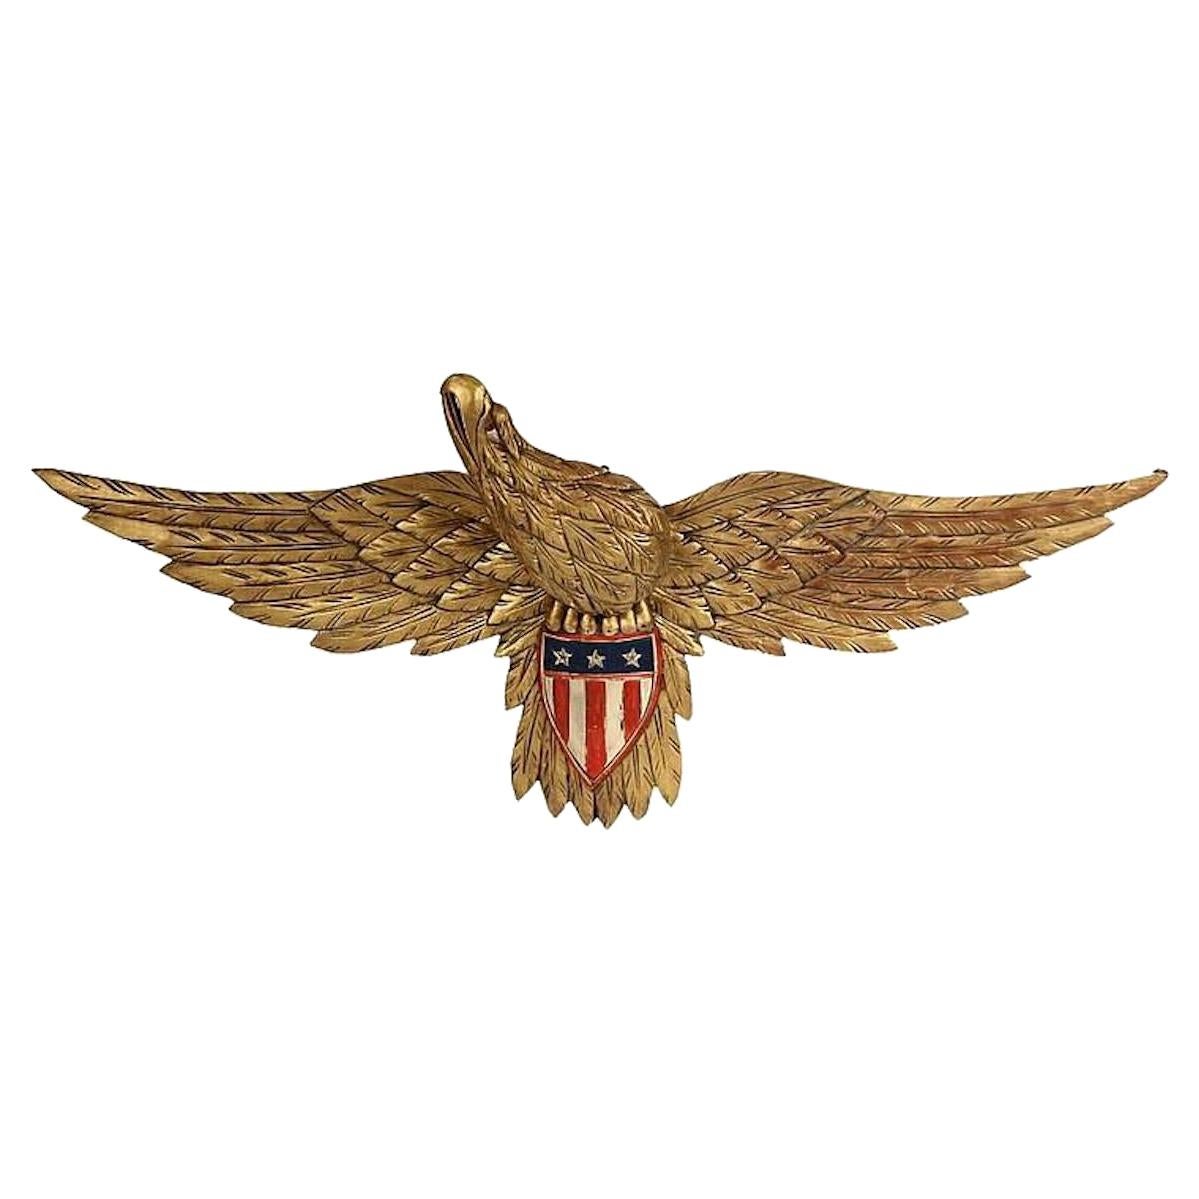 American Hand-Carved Folk Eagle with Shield, Circa 1930-1950